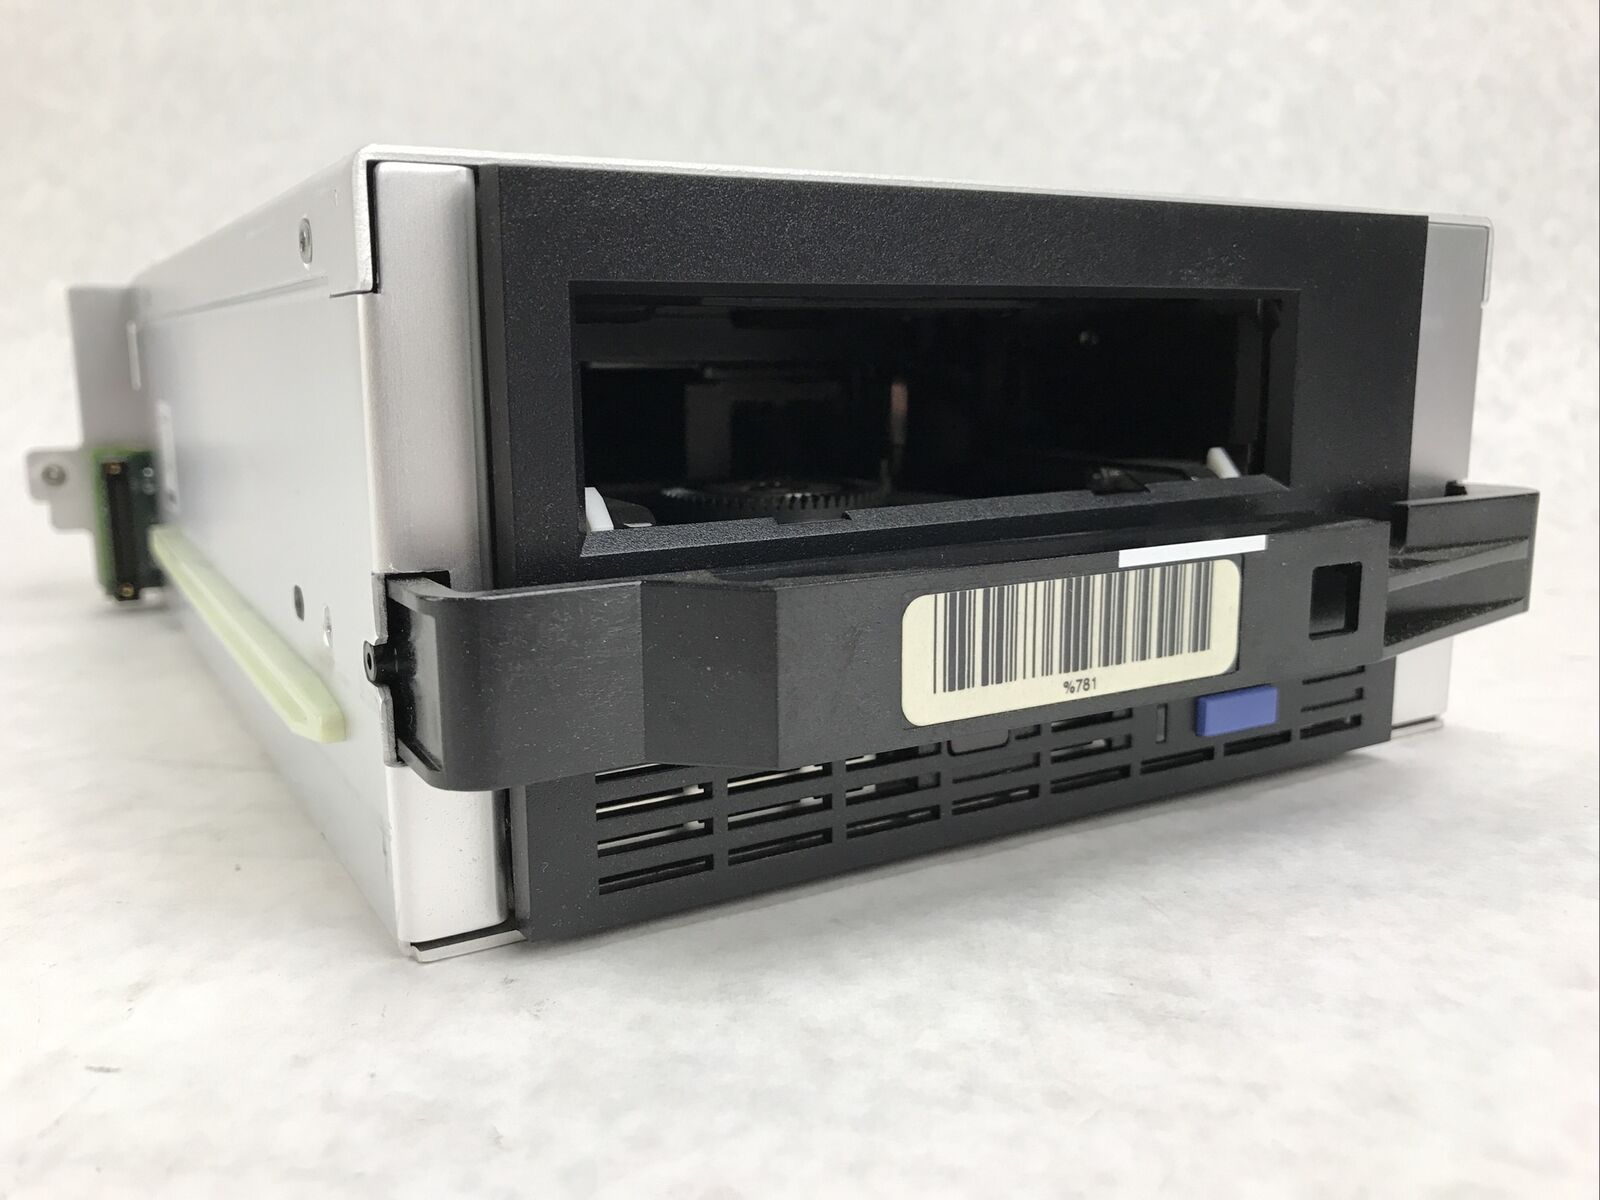 DELL 0WN444 WN444 Powervault ML6000 LTO-4 FC Library Tape Drive